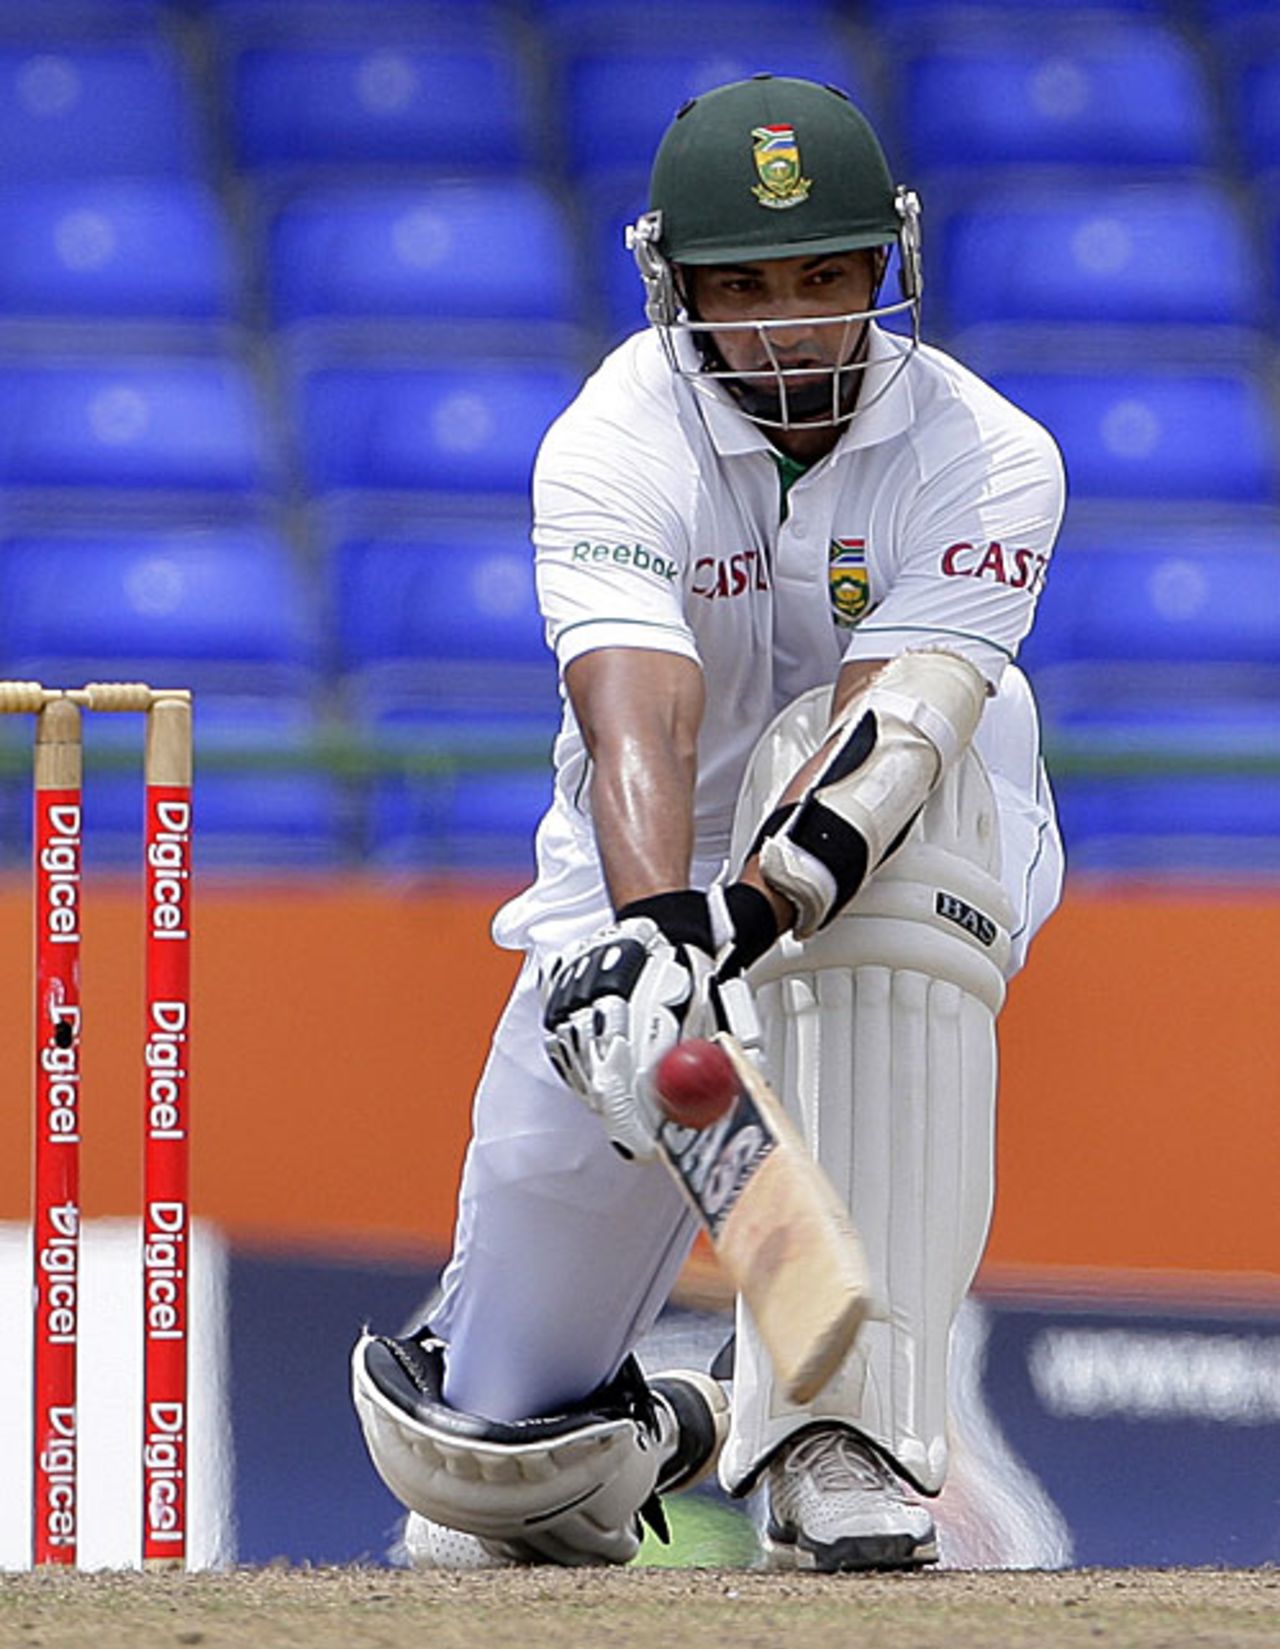 Alviro Petersen attempts the reverse sweep, West Indies v South Africa, 2nd Test, St Kitts, 5th day, June 22, 2010